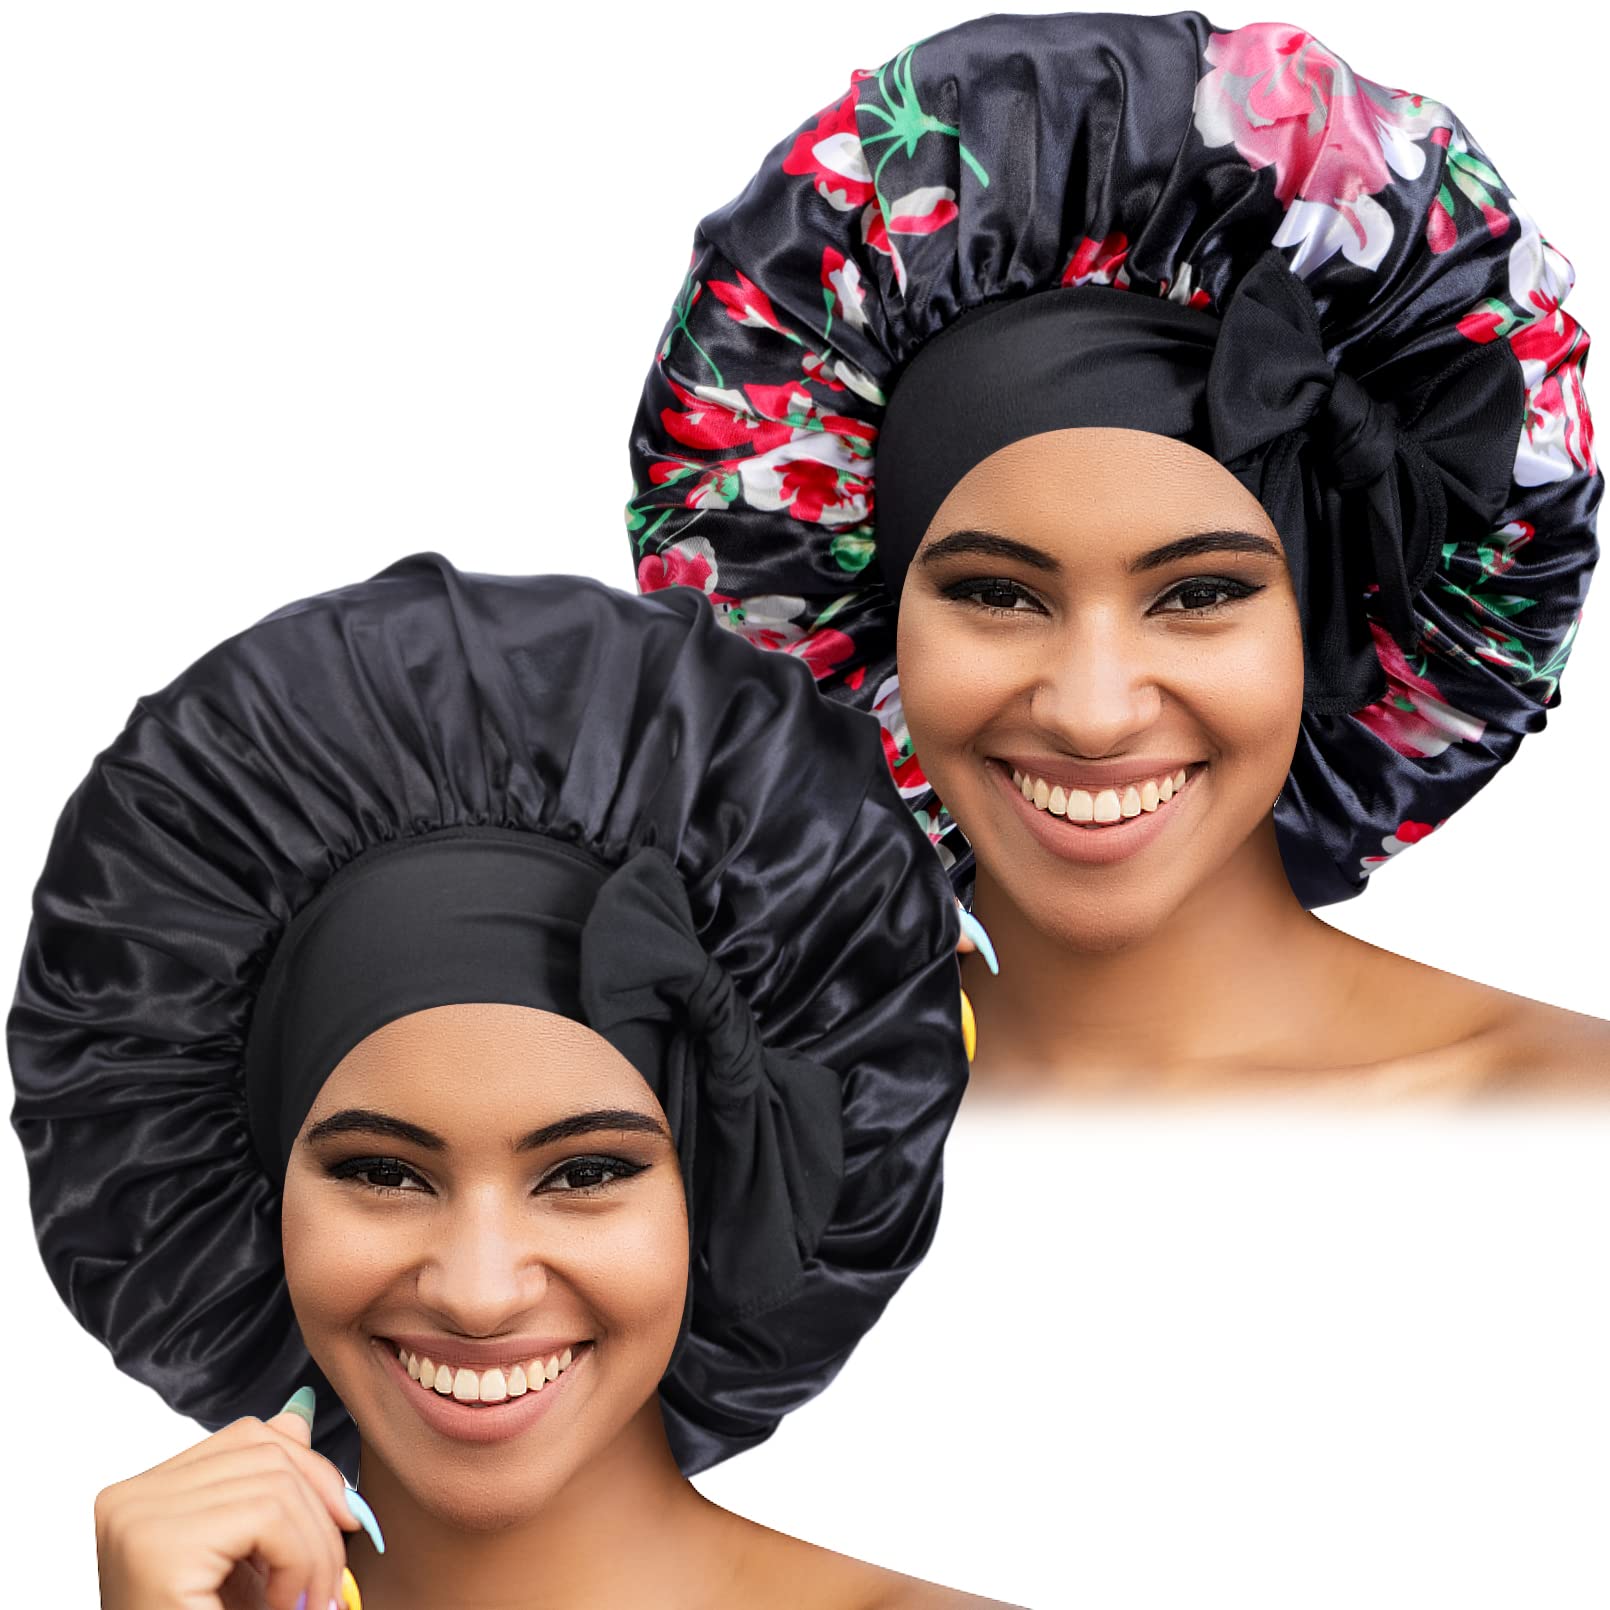 2PCS/LOT Women's Satin Bonnet With Wide Stretch Ties Band Long